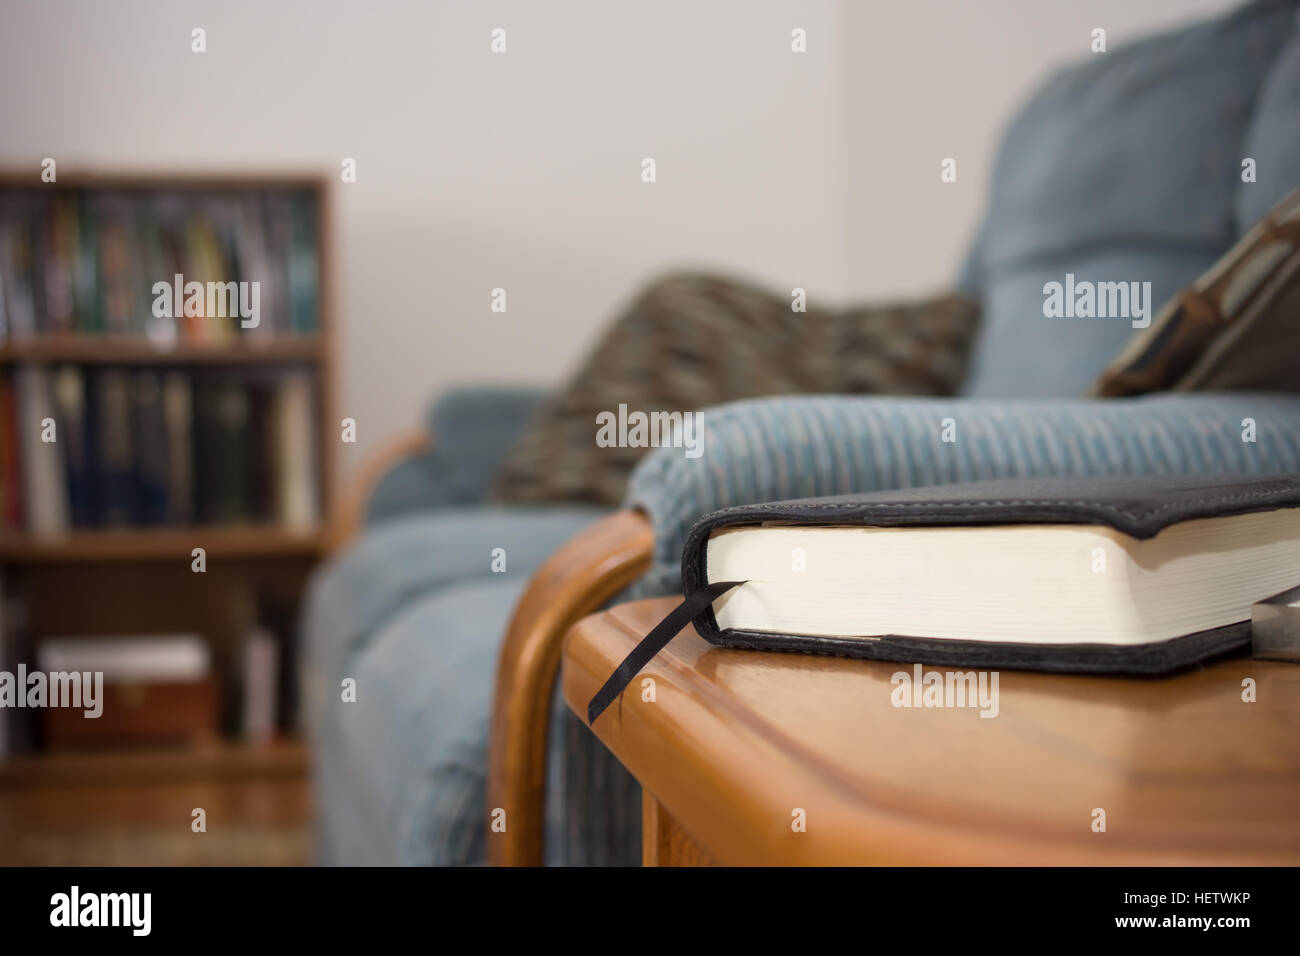 Indoor Waiting Area with book for reading on table. Stock Photo